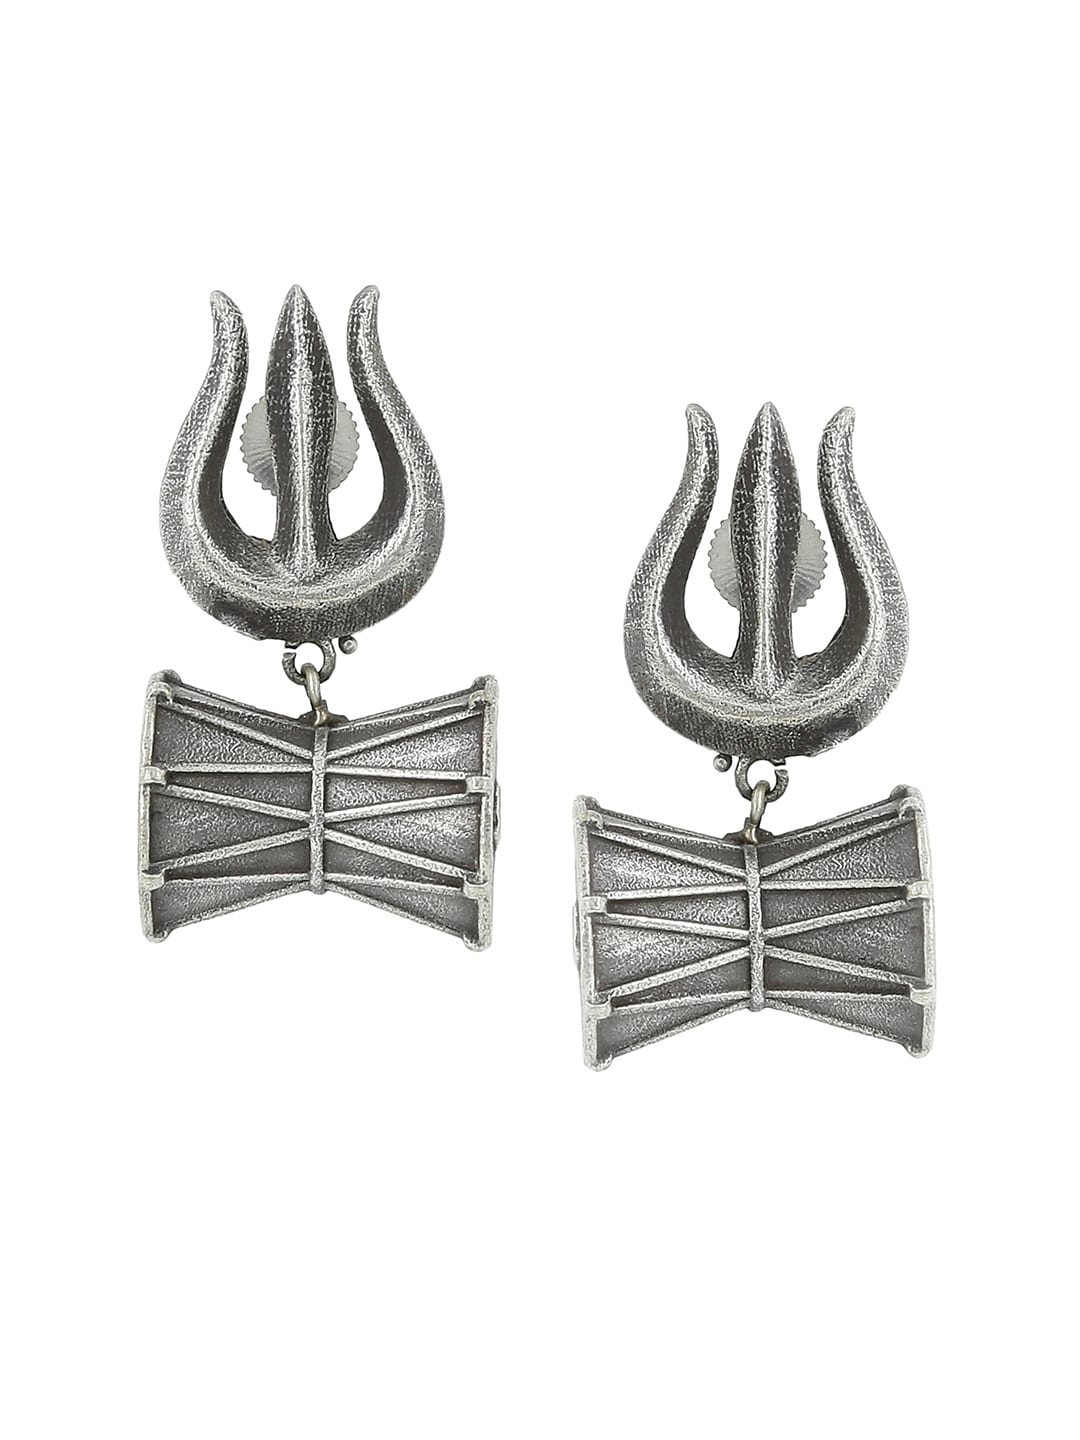 EL REGALO Silver-Toned Classic Trishool Studs Earrings - for Women and Girls
Style ID: 16991456